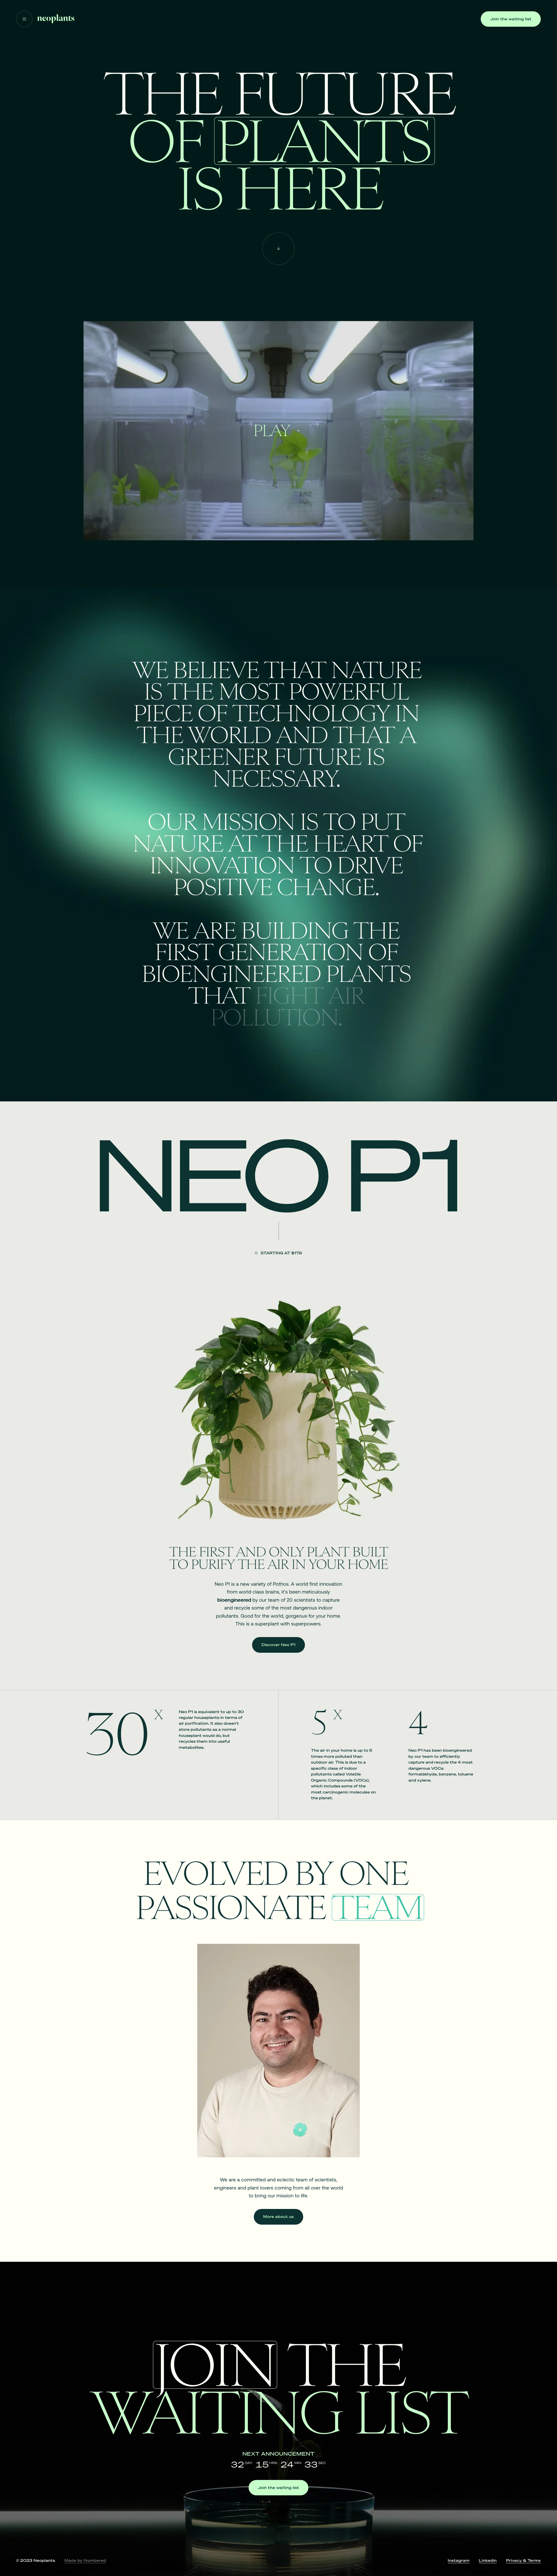 Neoplants Landing Page Example: The first generation of bioengineered to fight air pollution. We call them neoplants.